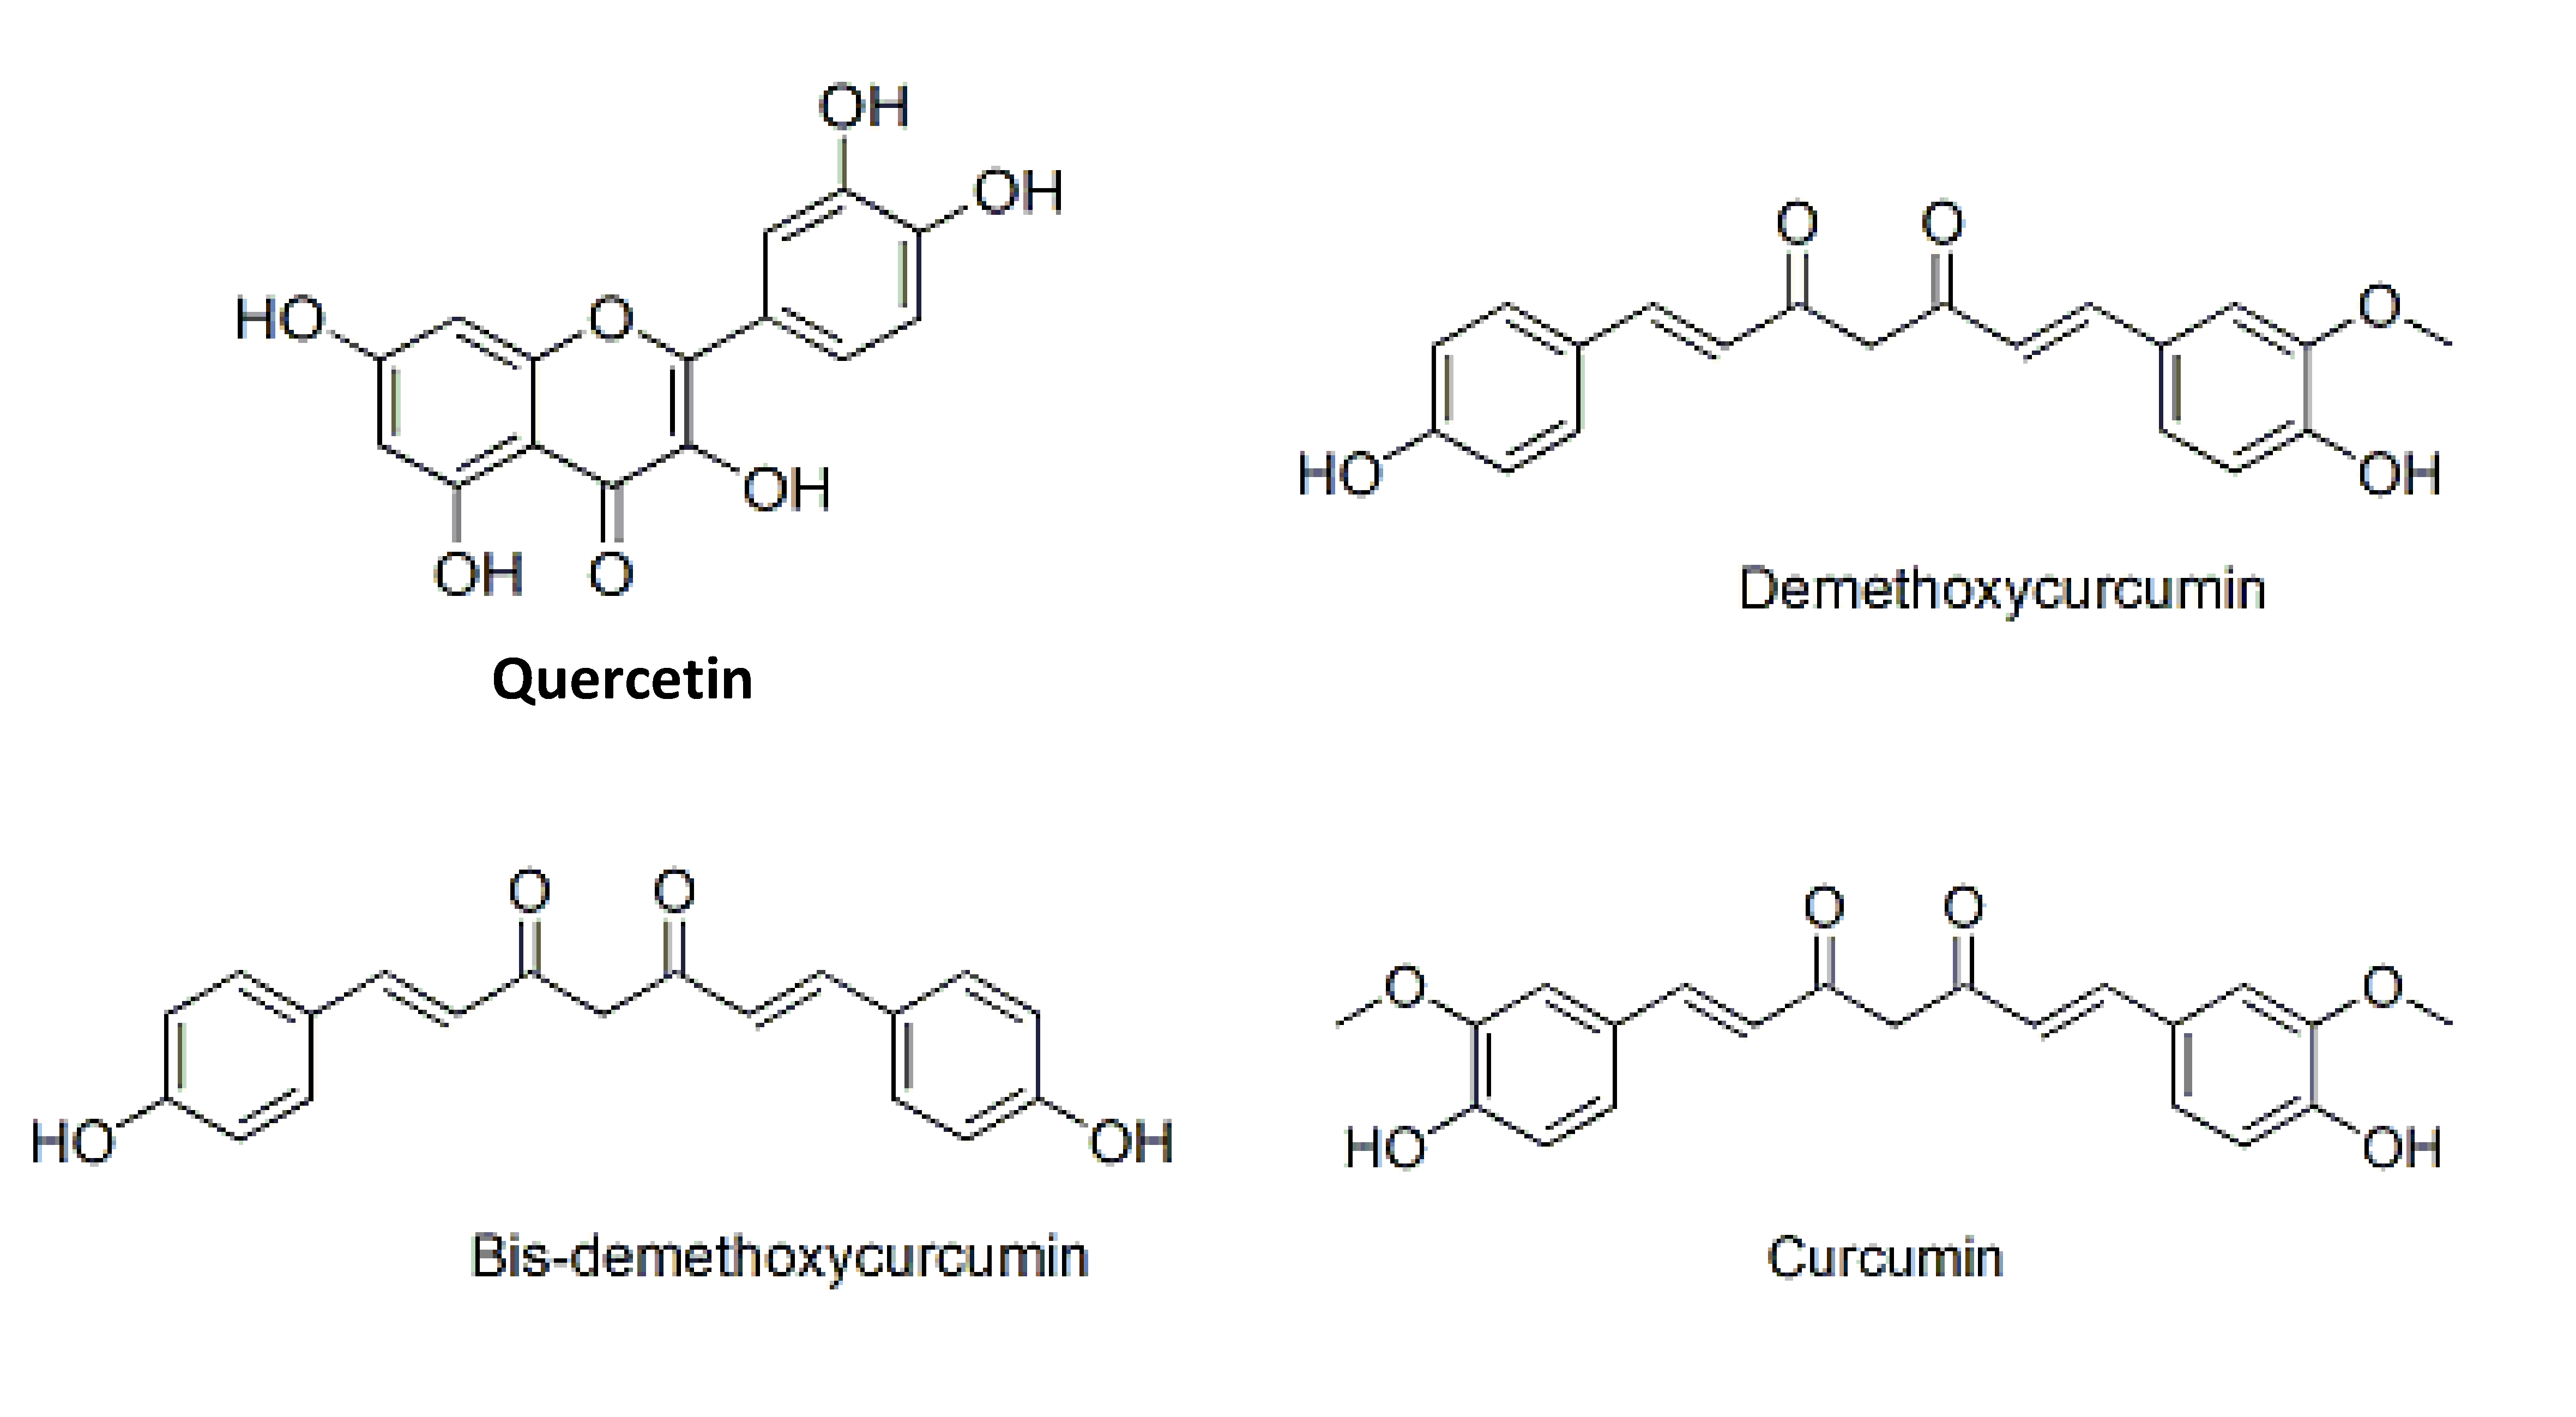 Chemical structures of quercetin, and the curcuminoids: curcumin, demethoxycurcumin and bisdemethoxycurcumin.